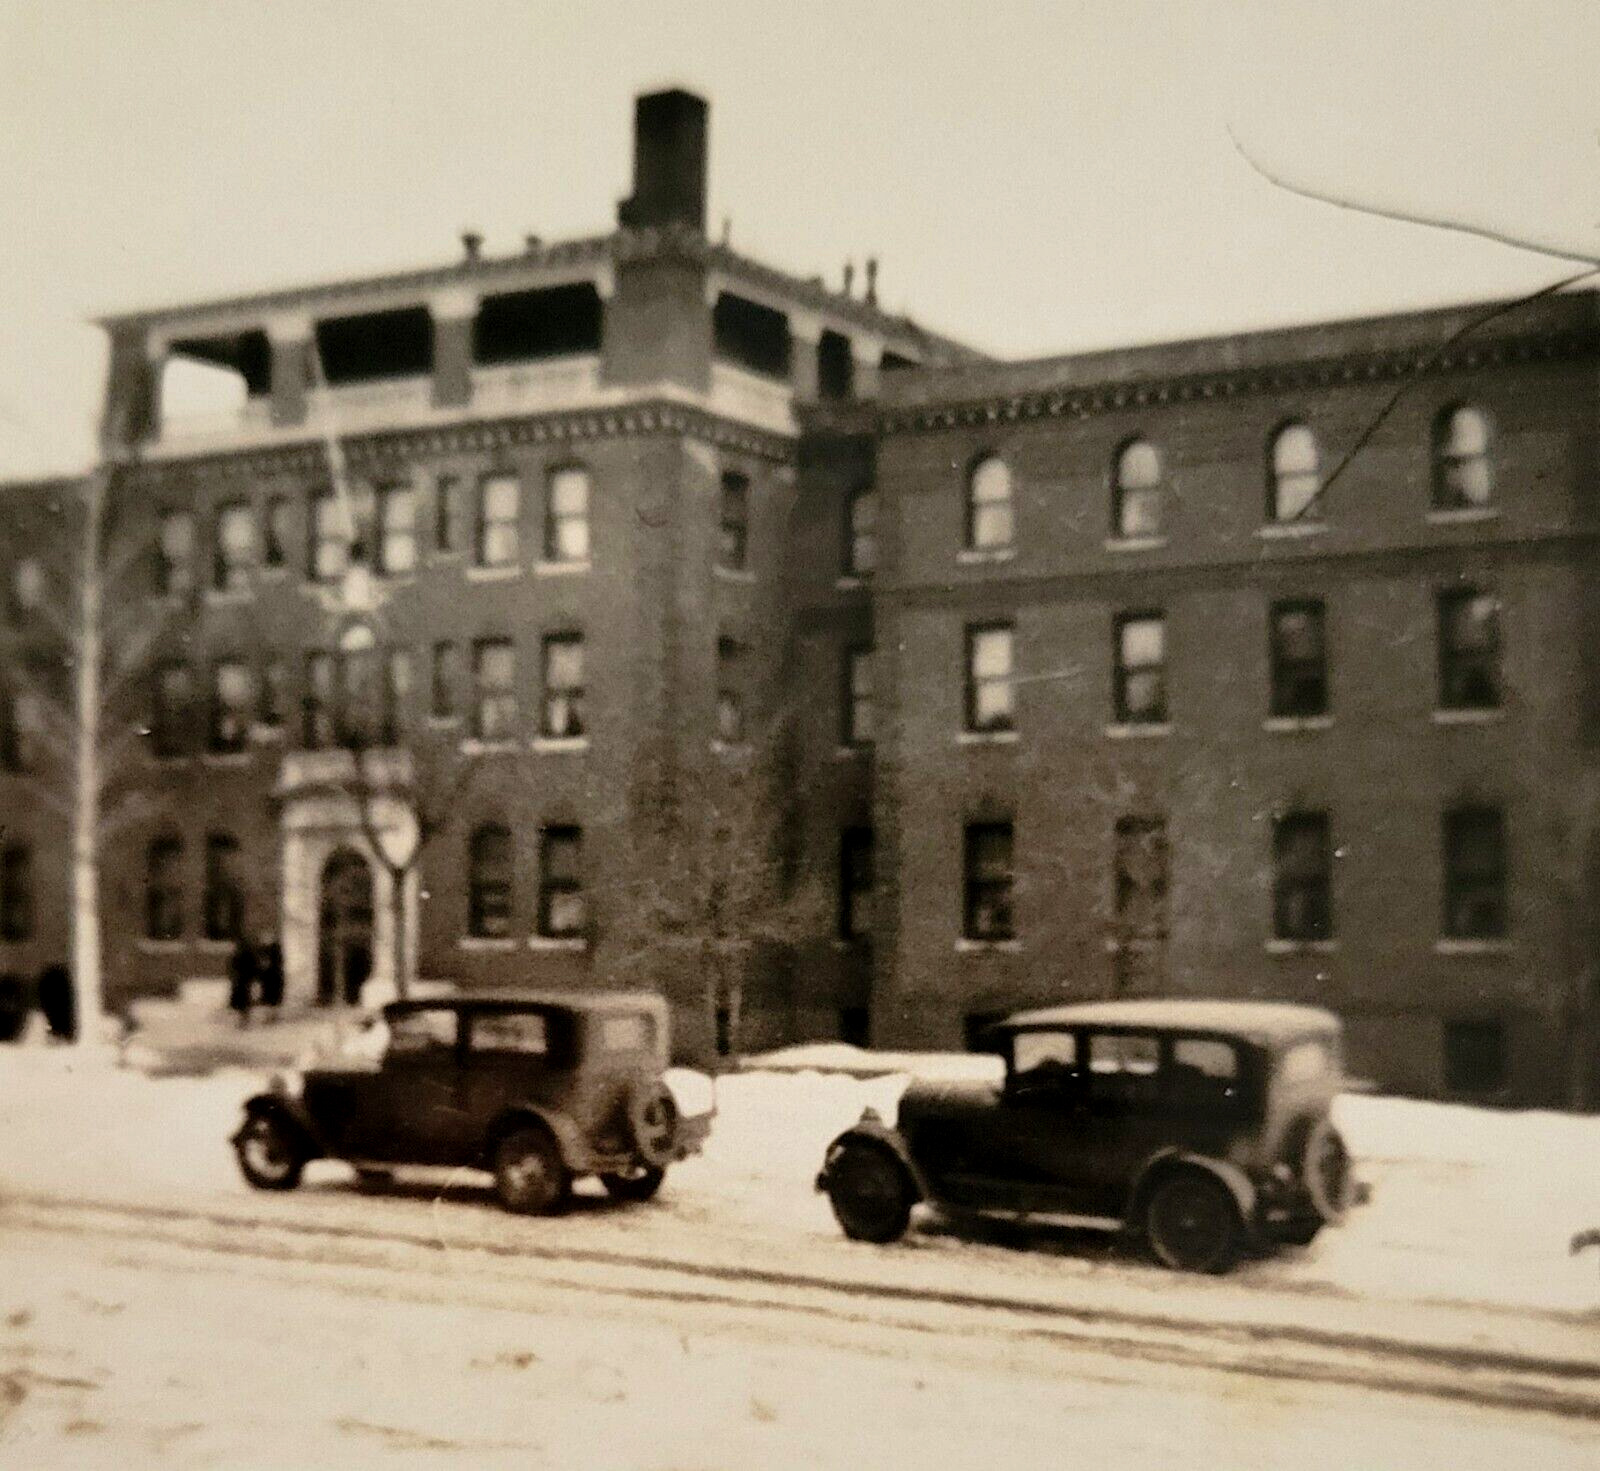 c1920s Old Cars by Historic Brick Building Original Photo